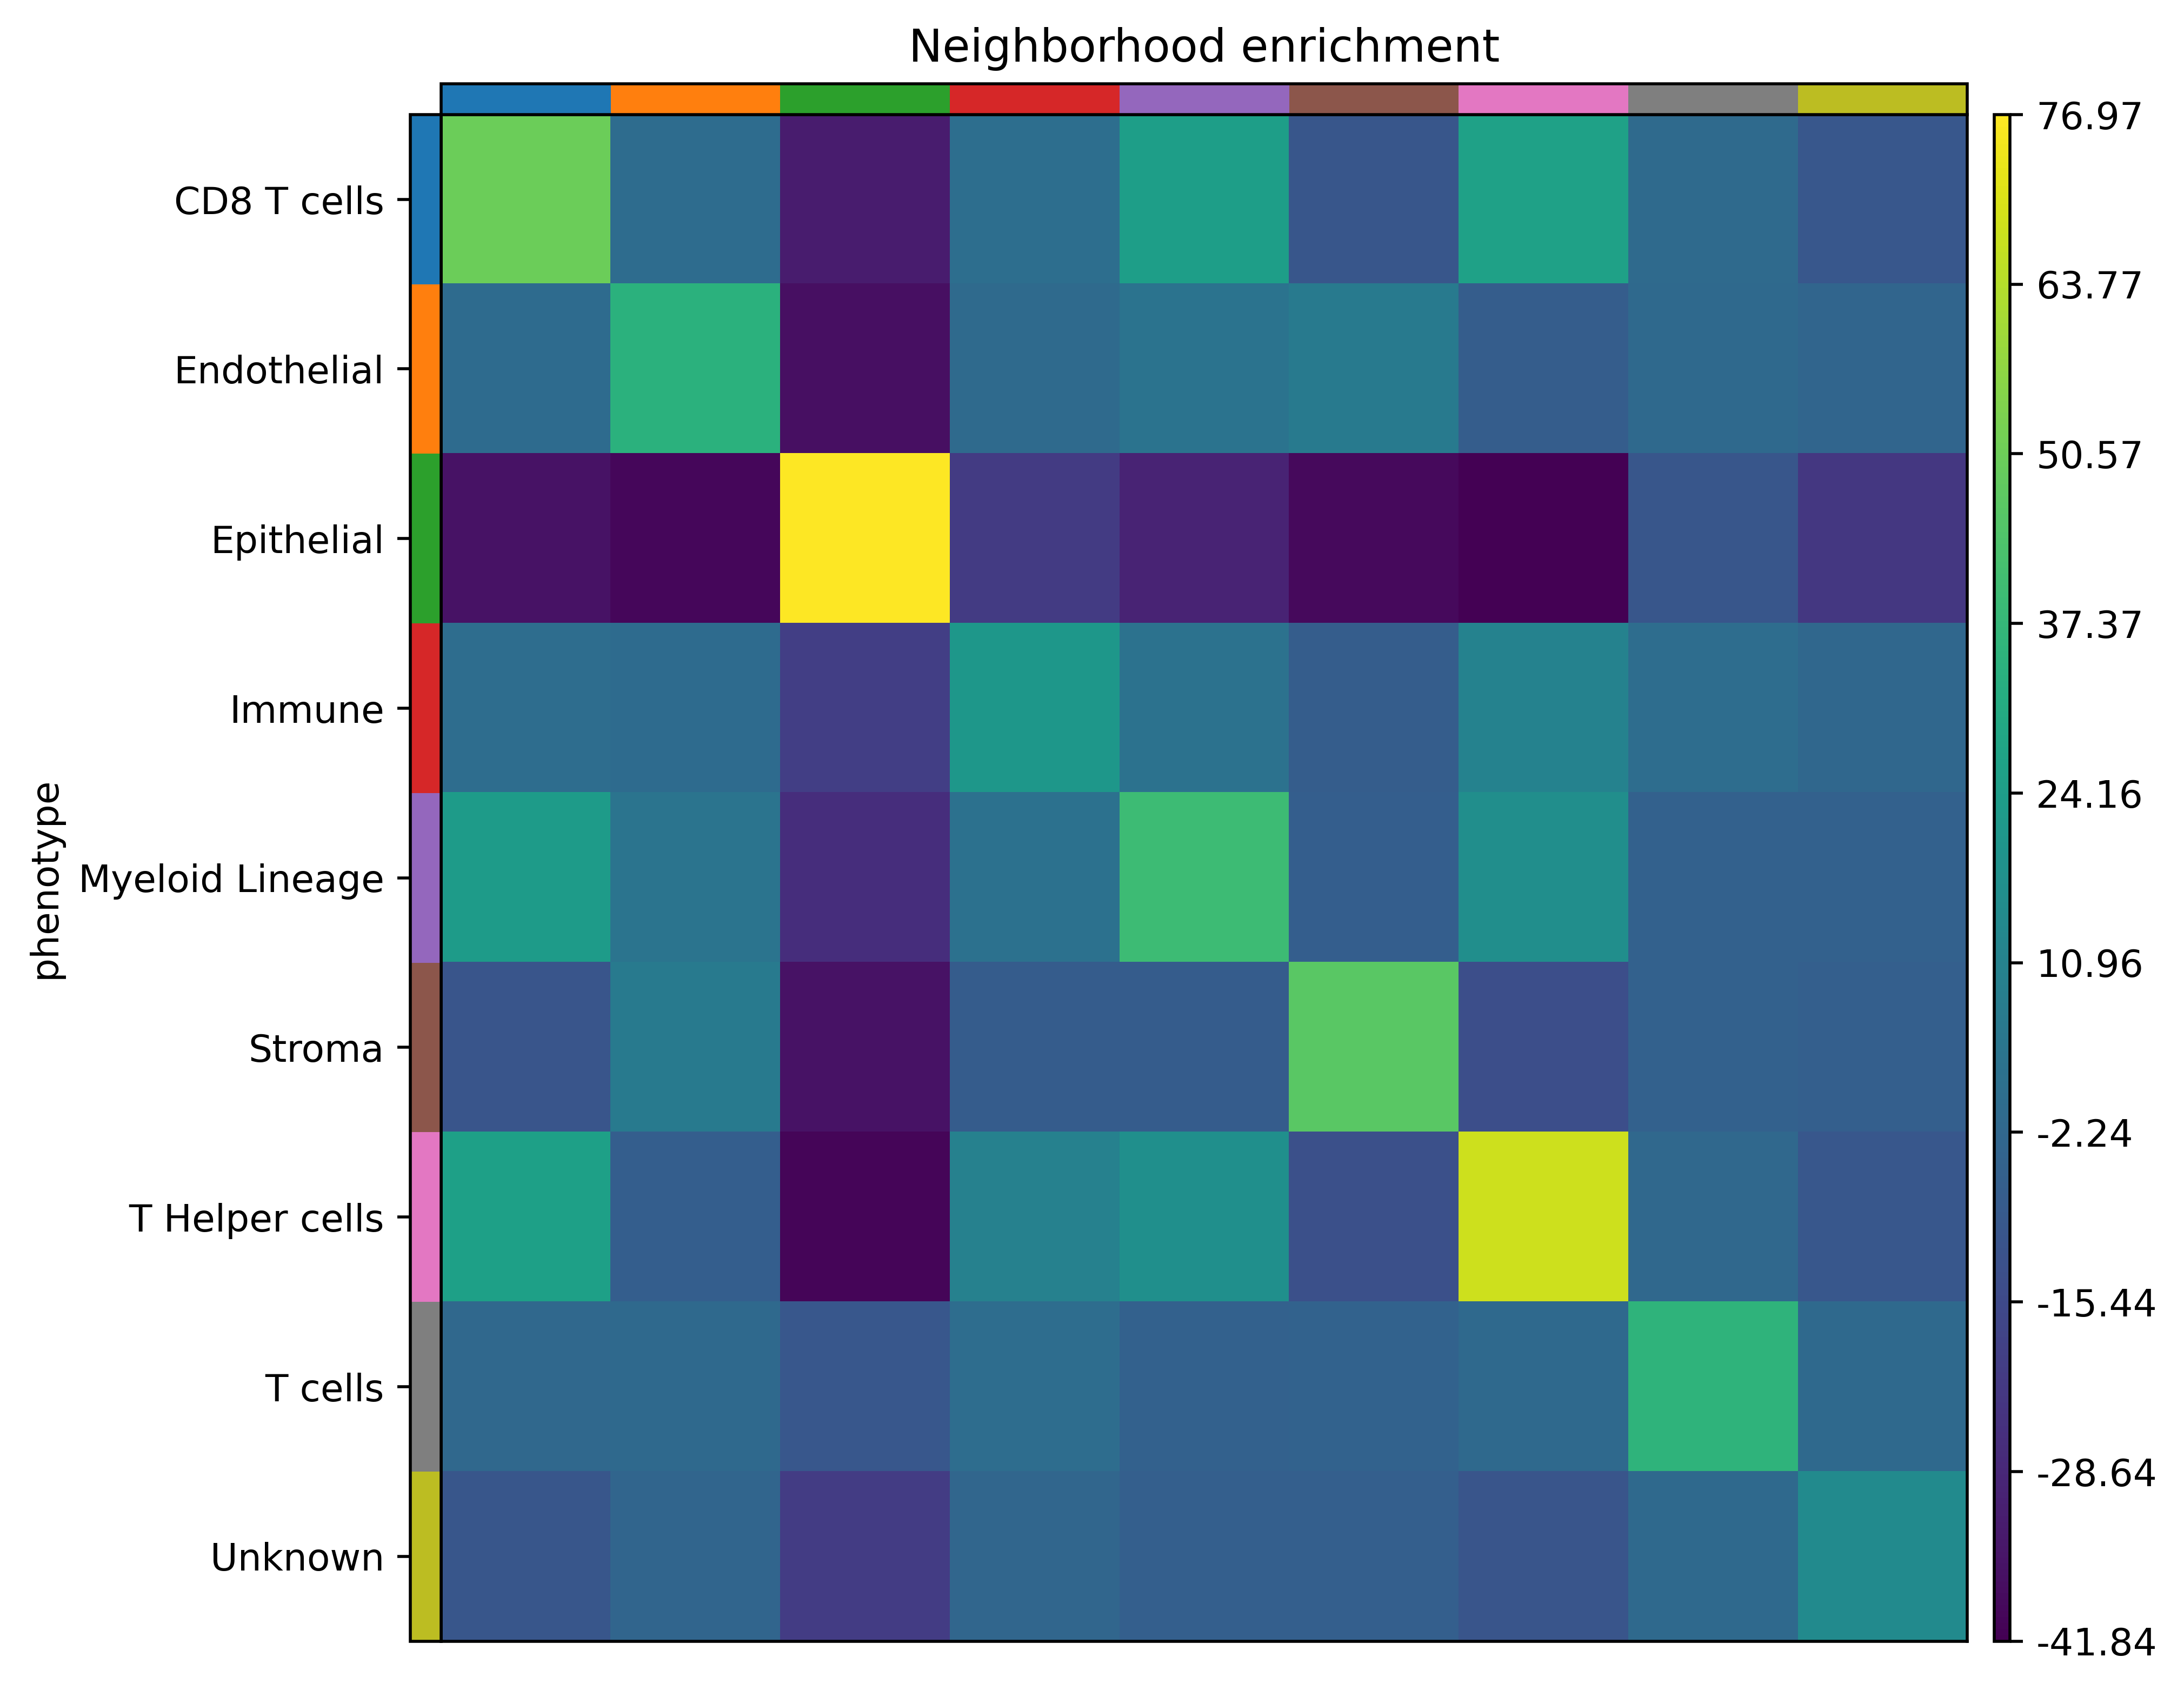 Heatmap showing phenotype vs neighbourhood enrichment. Most of the heatmap is blue/green (low) but one cell under epithelial is bright yellow (high). 